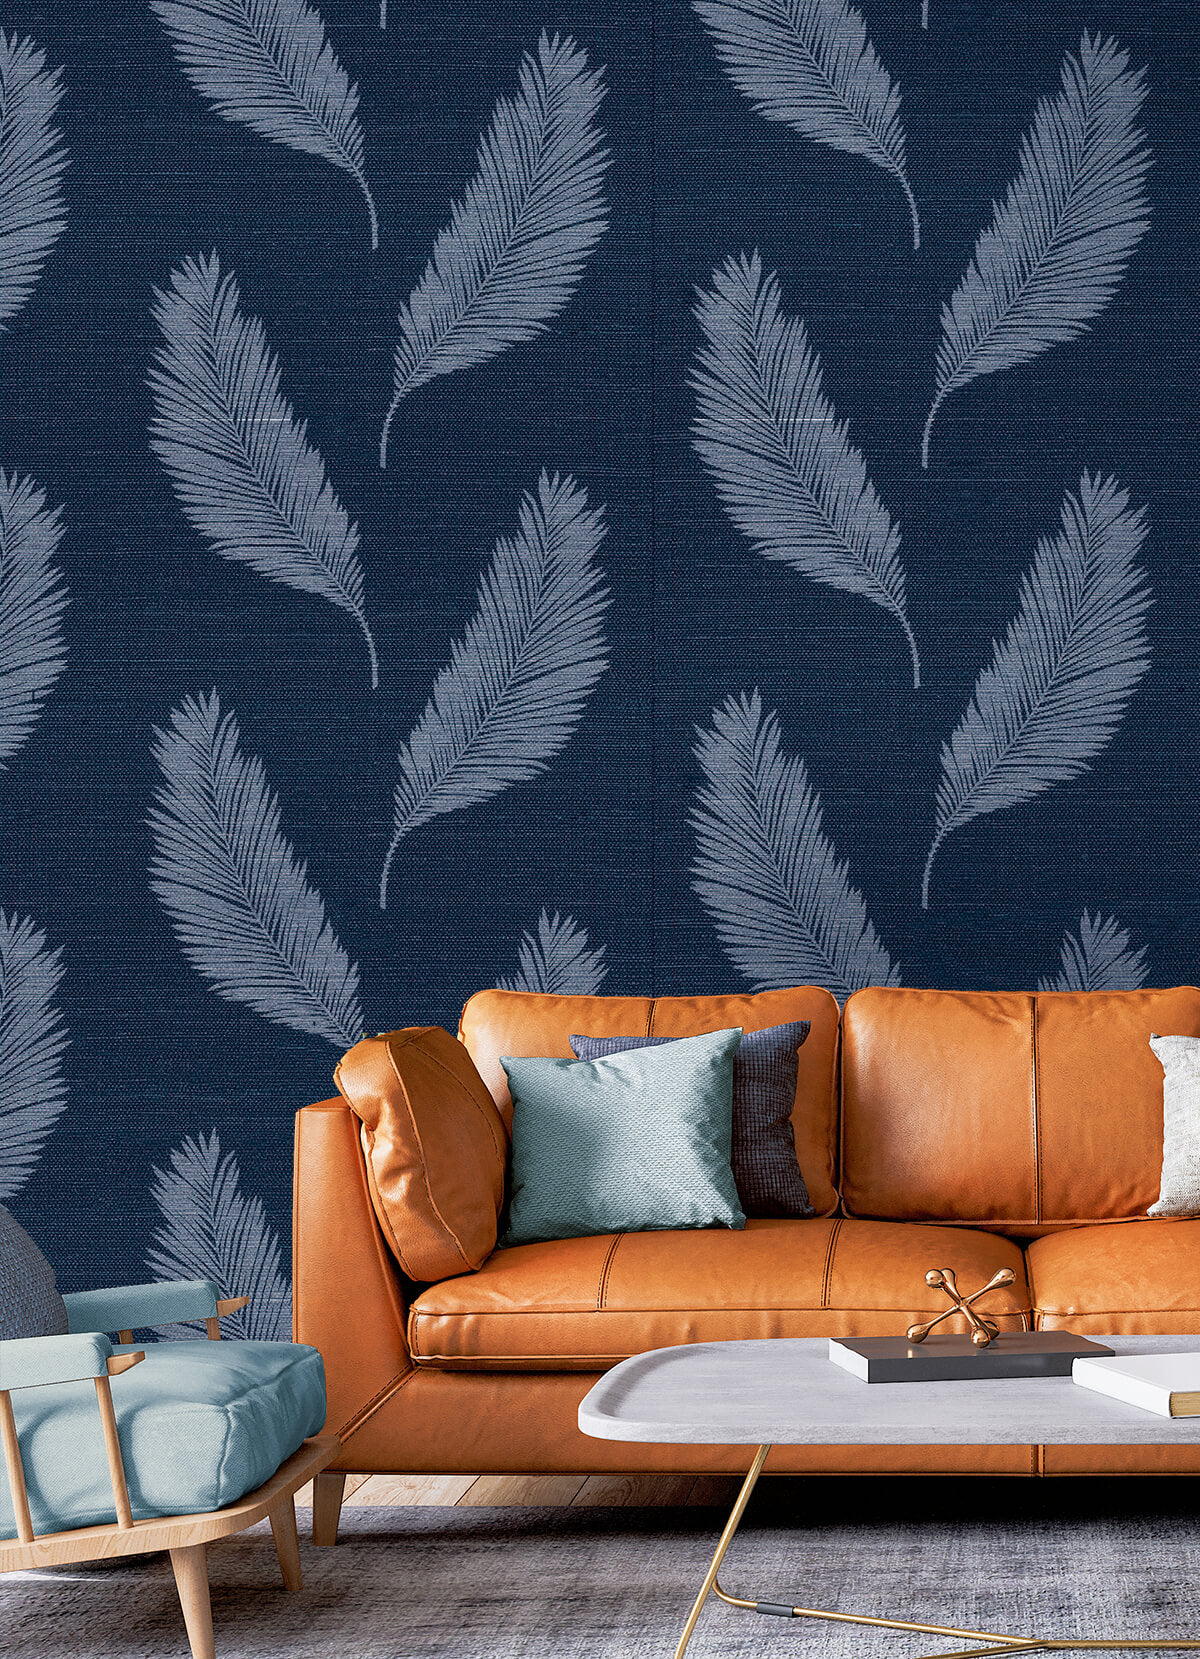 Seabrook Summer House Tossed Palm Grasscloth Wallpaper - Midnight Blue